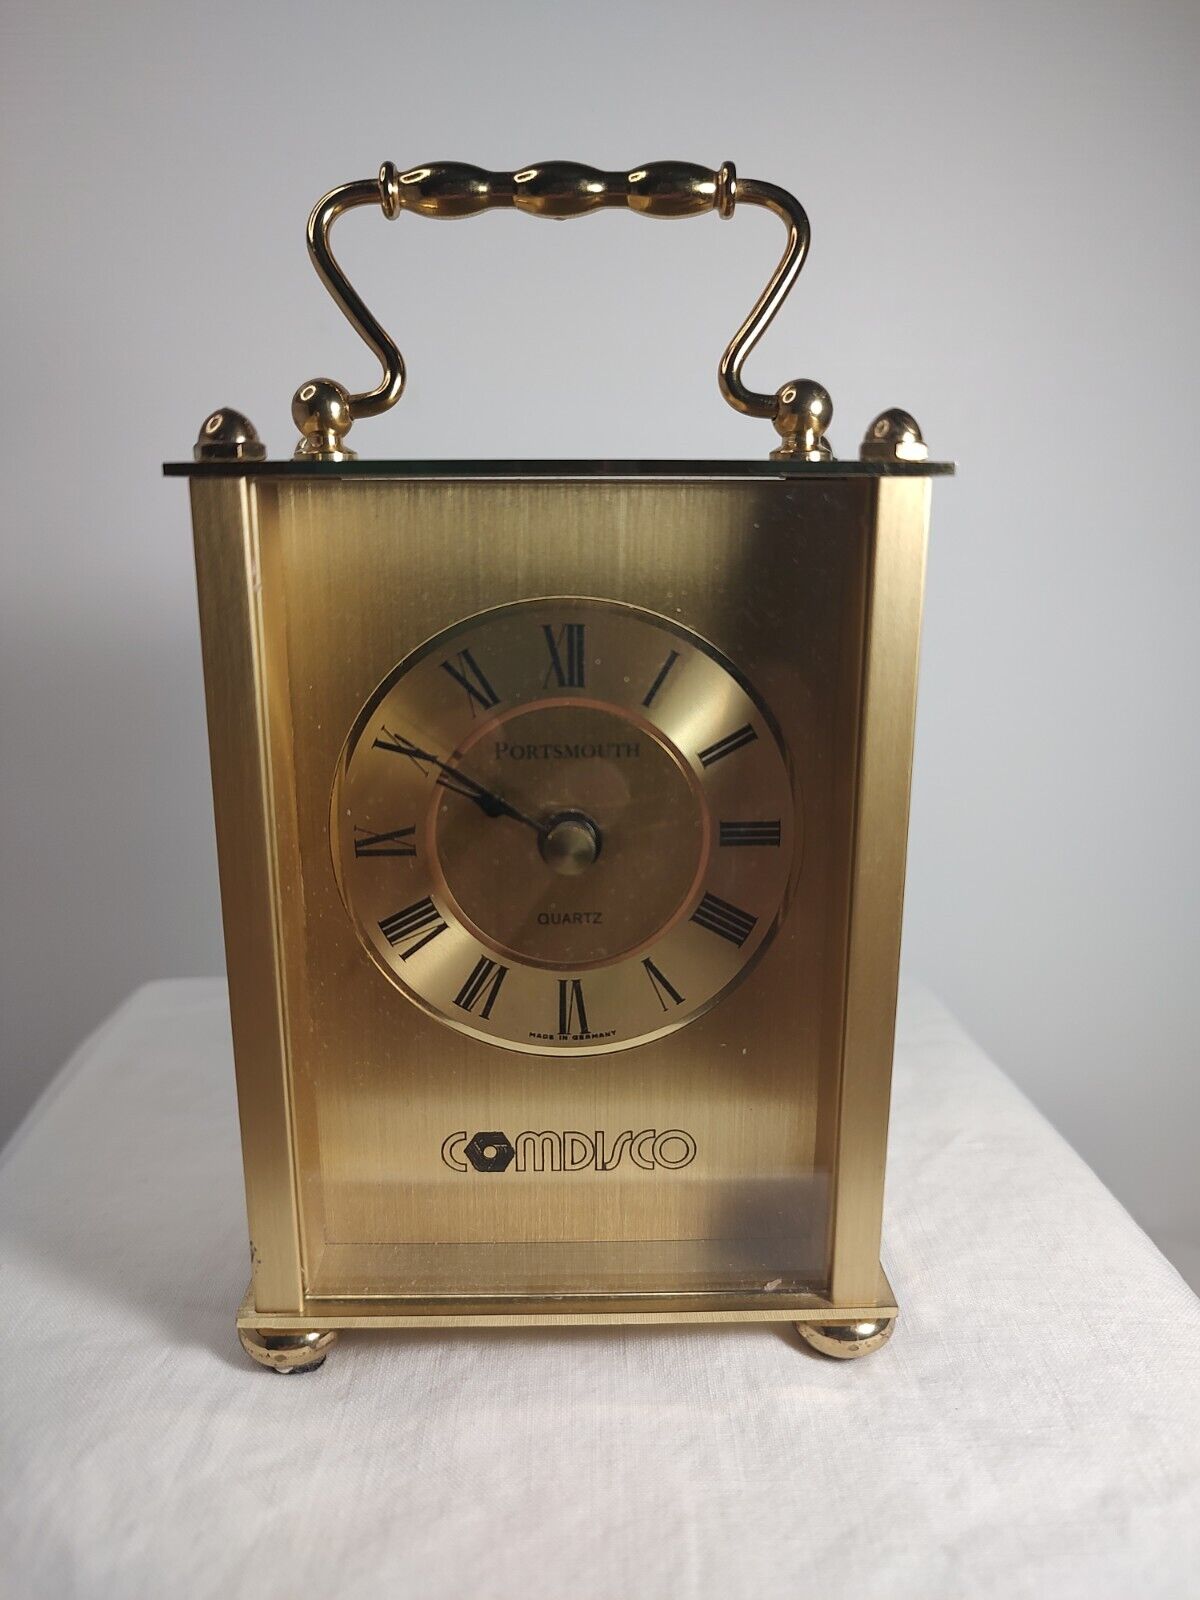 Vintage Portsmouth Quartz Gold Mantle Clock Made In Germany With Comdisco Logo 